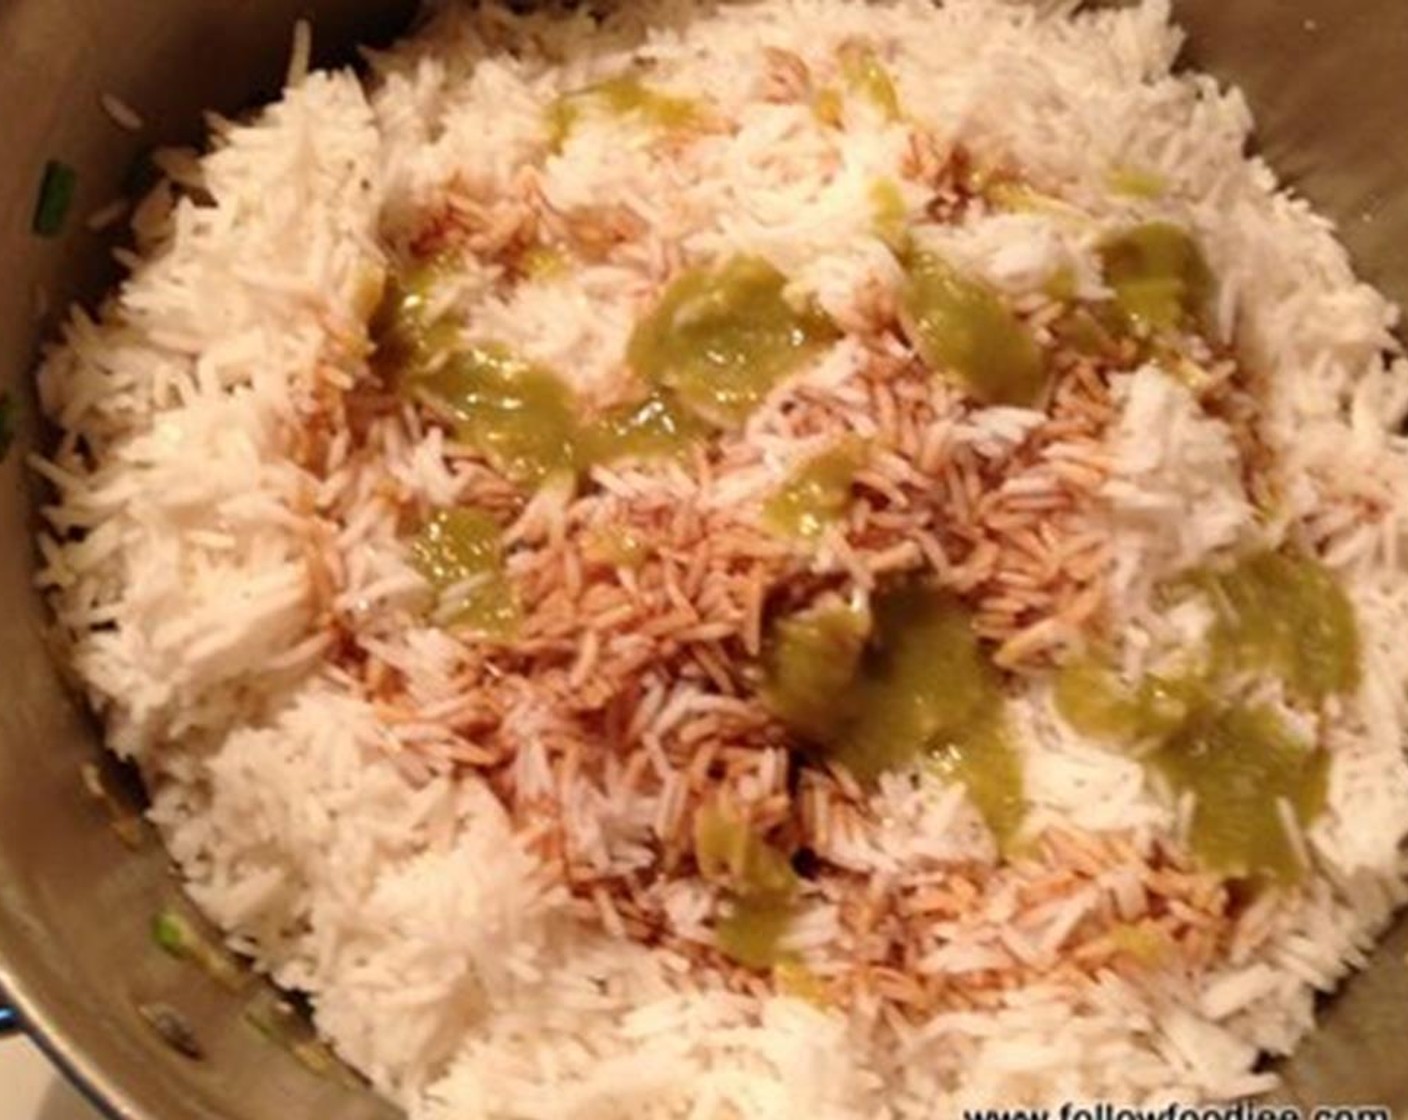 step 4 Add cooked White Rice (2 Tbsp), Green Chili Paste (1 Tbsp), and Soy Sauce (1/2 Tbsp). Mix until fully combined.